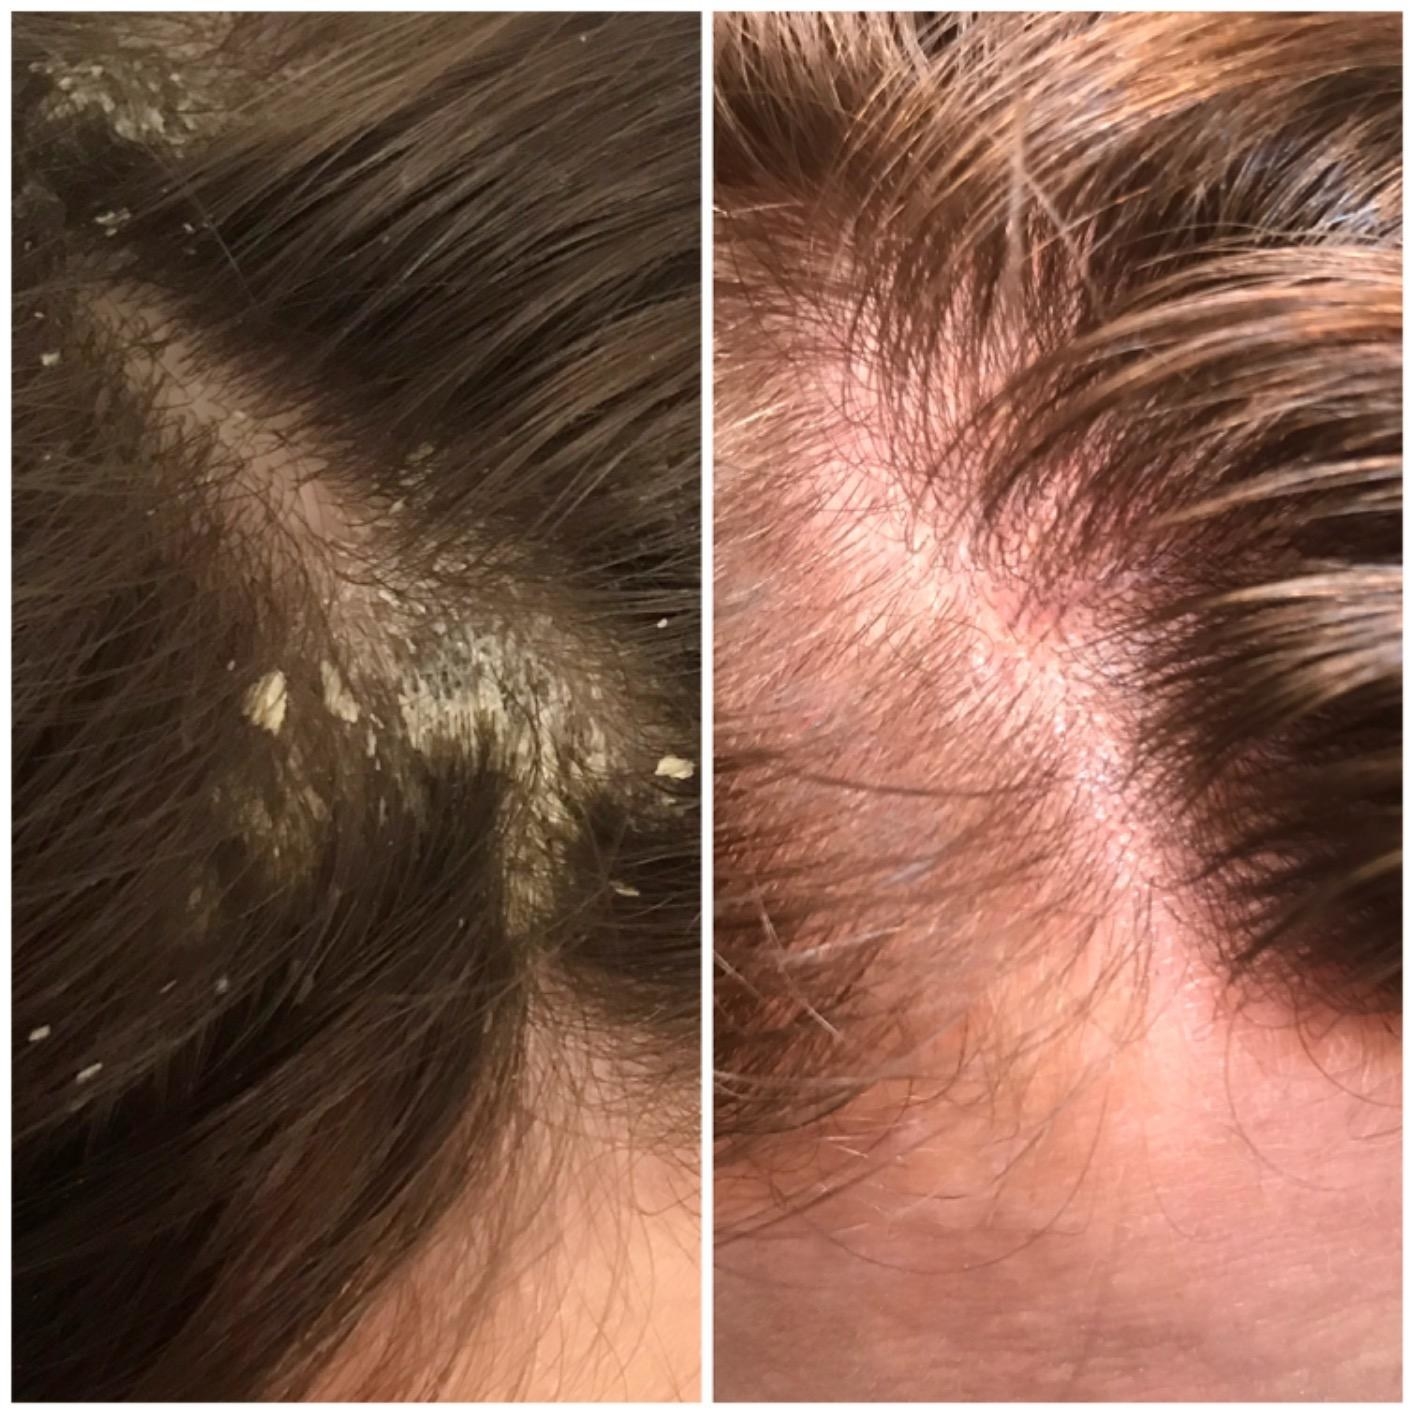 on the left a reviewer&#x27;s scalp with dandruff flakes, on the right the same scalp with no dandruff